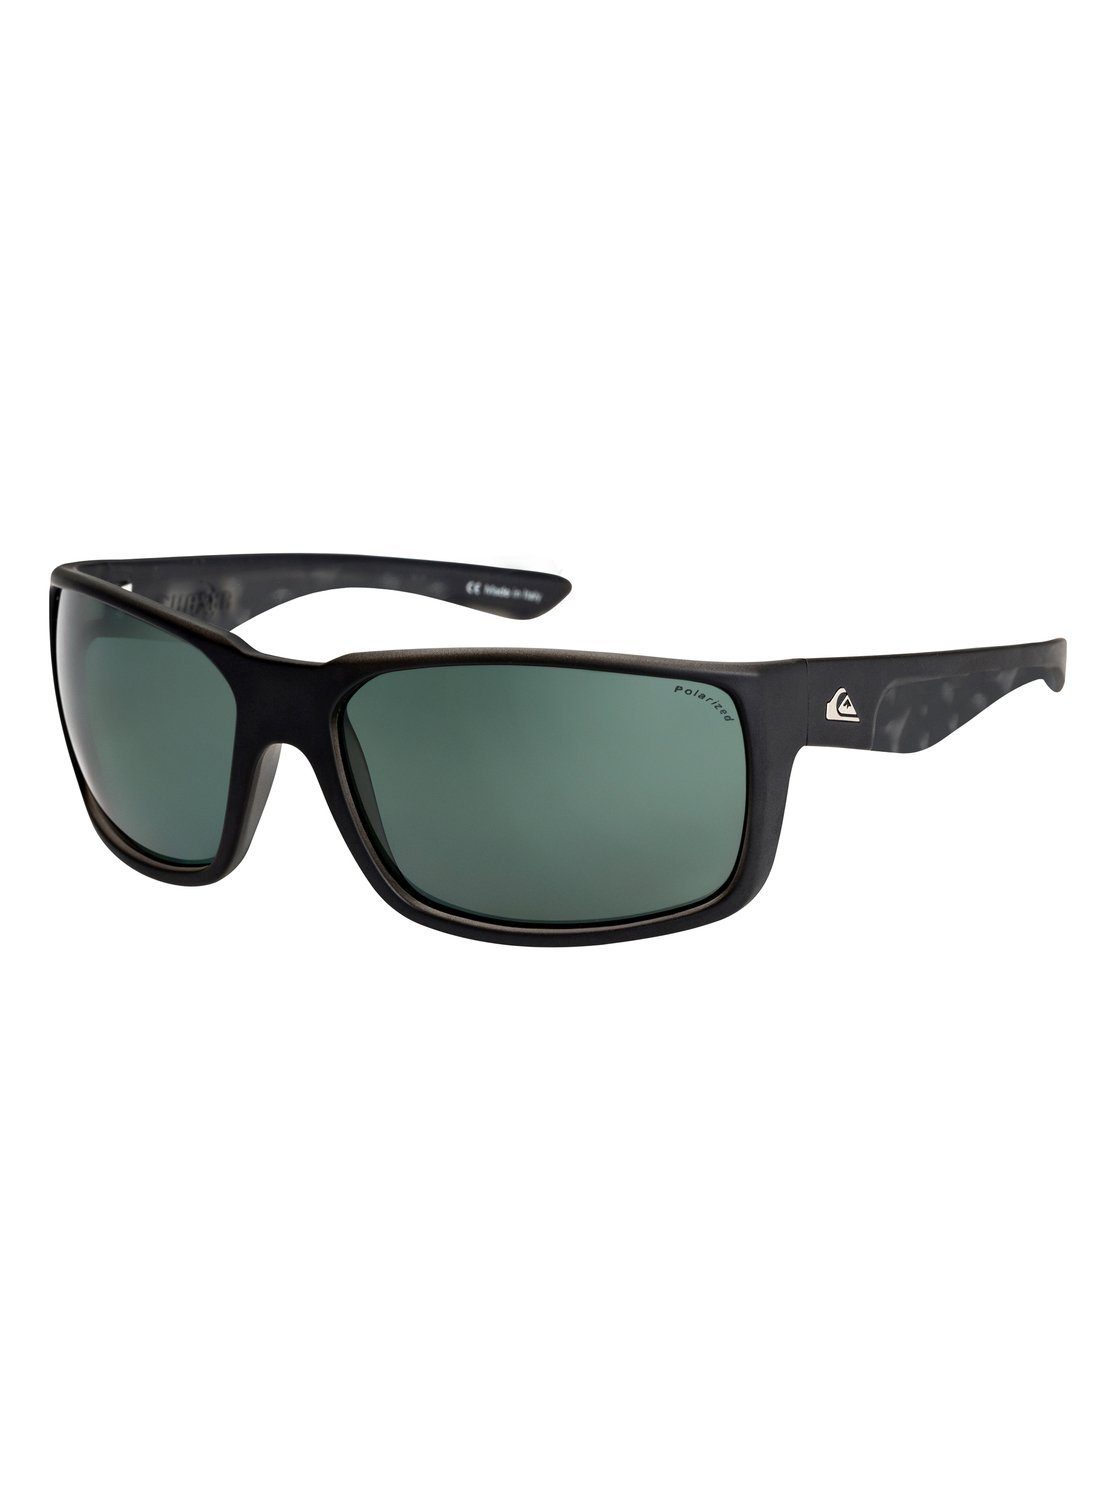 Otto - Quiksilver NU 15% KORTING: Quiksilver zonnebril Chaser Polarised